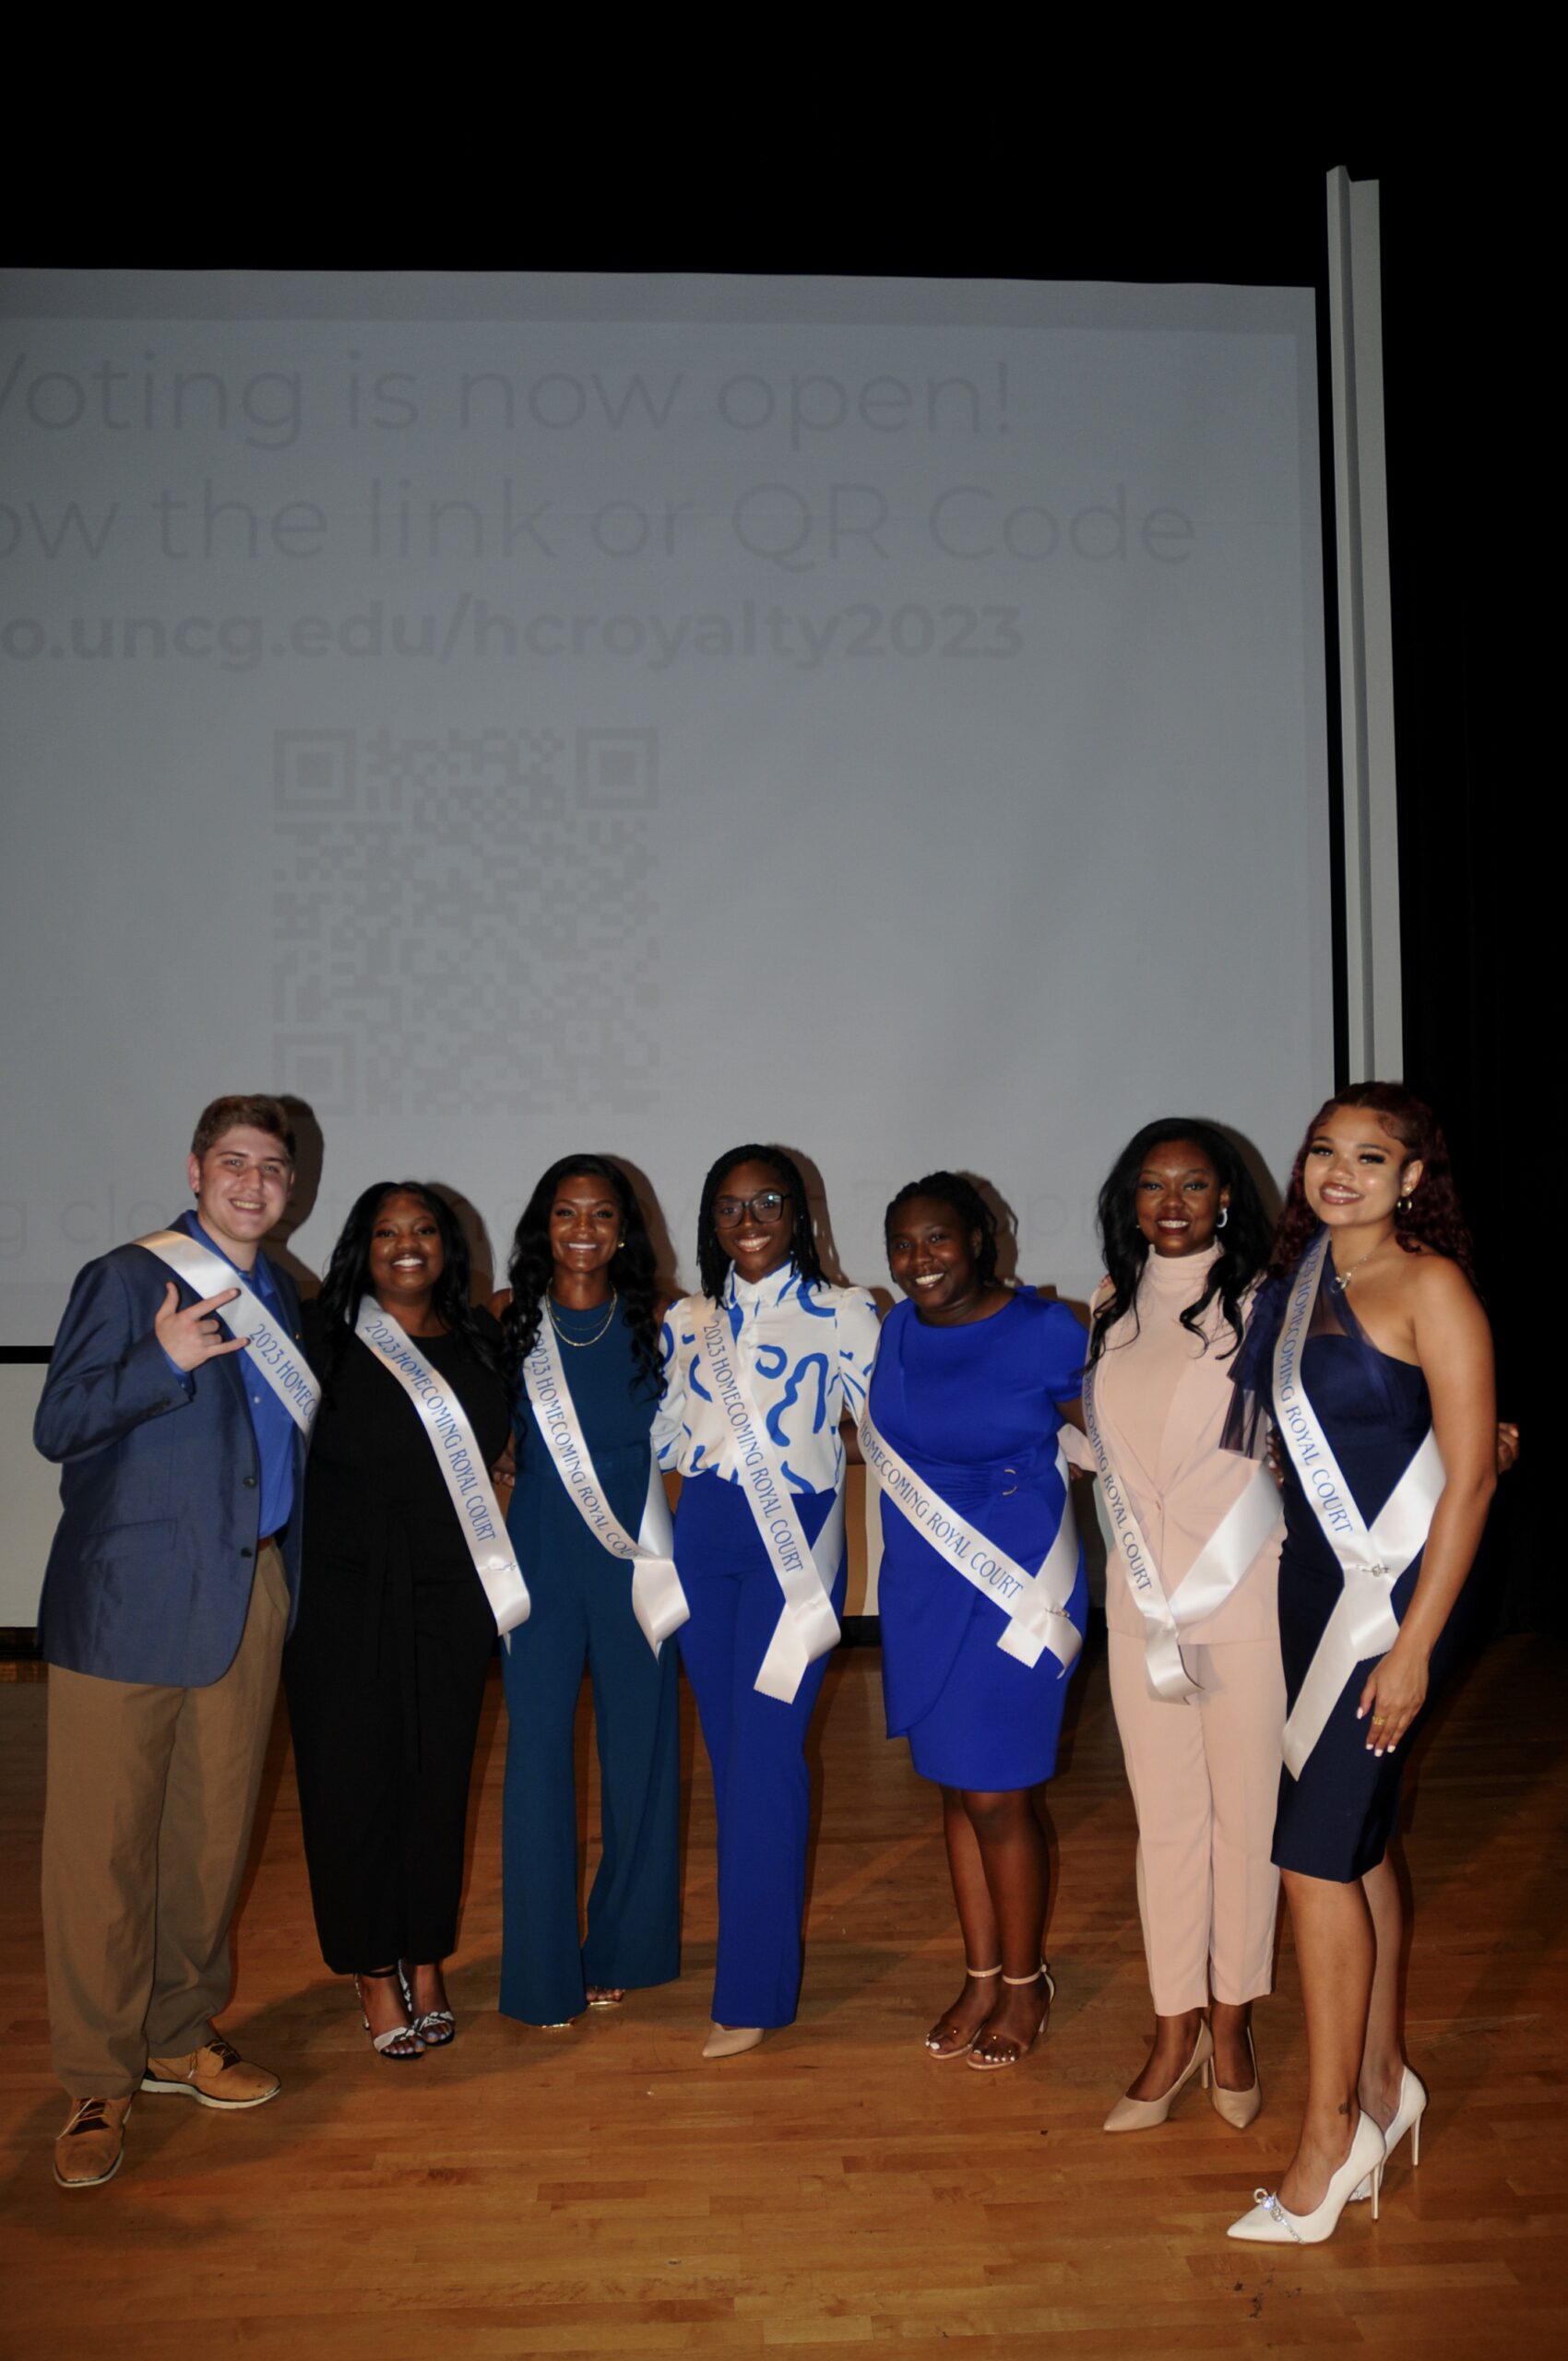 Seven students pose together wearing formal attire and 2023 Homecoming Court sashes.